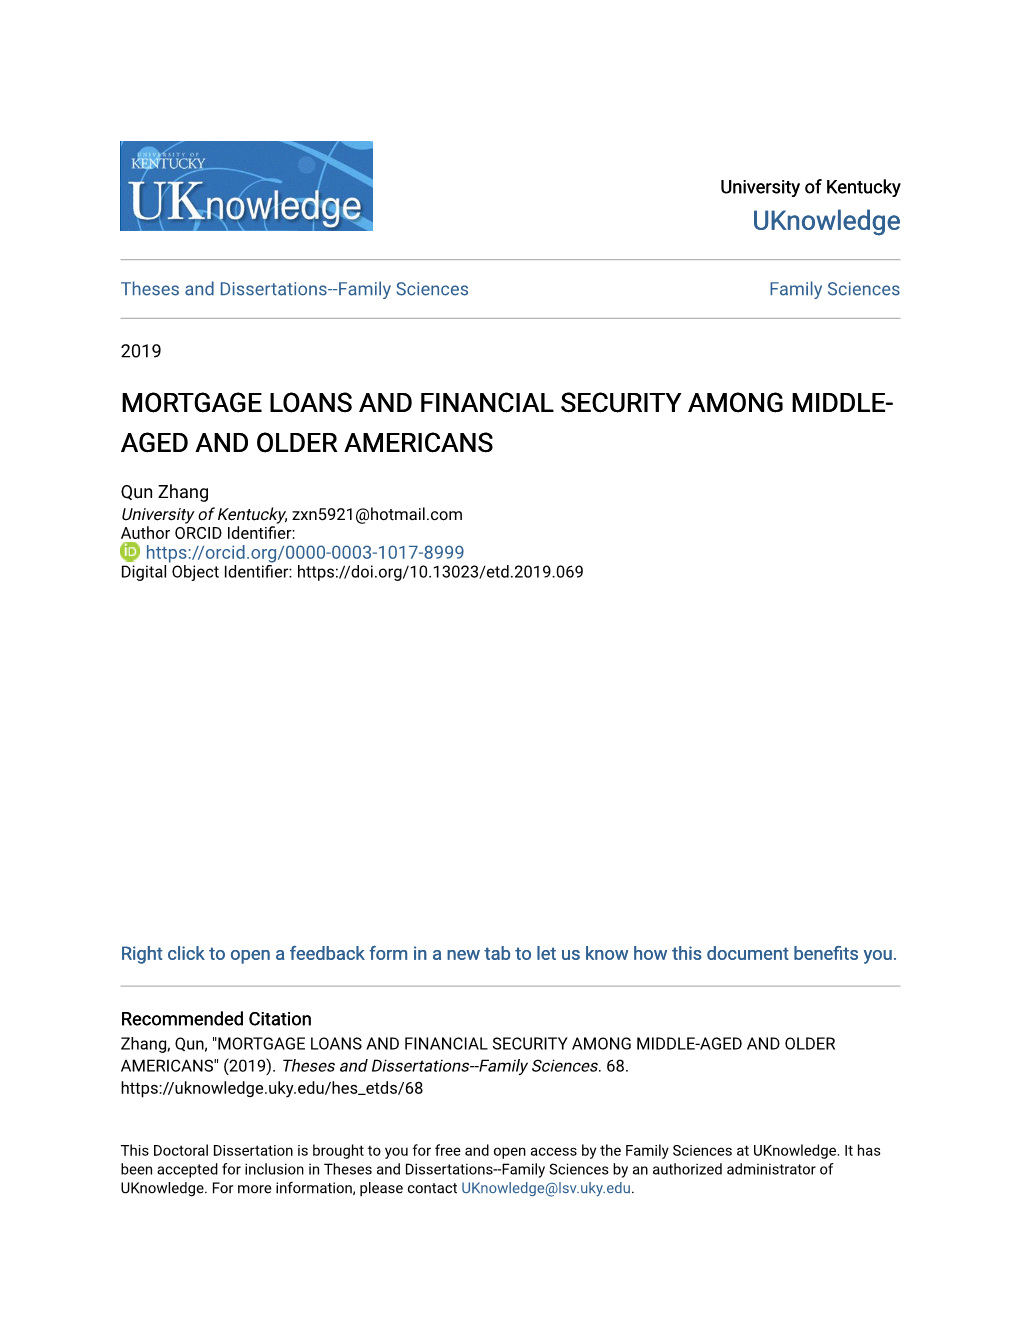 Mortgage Loans and Financial Security Among Middle-Aged and Older Americans" (2019)